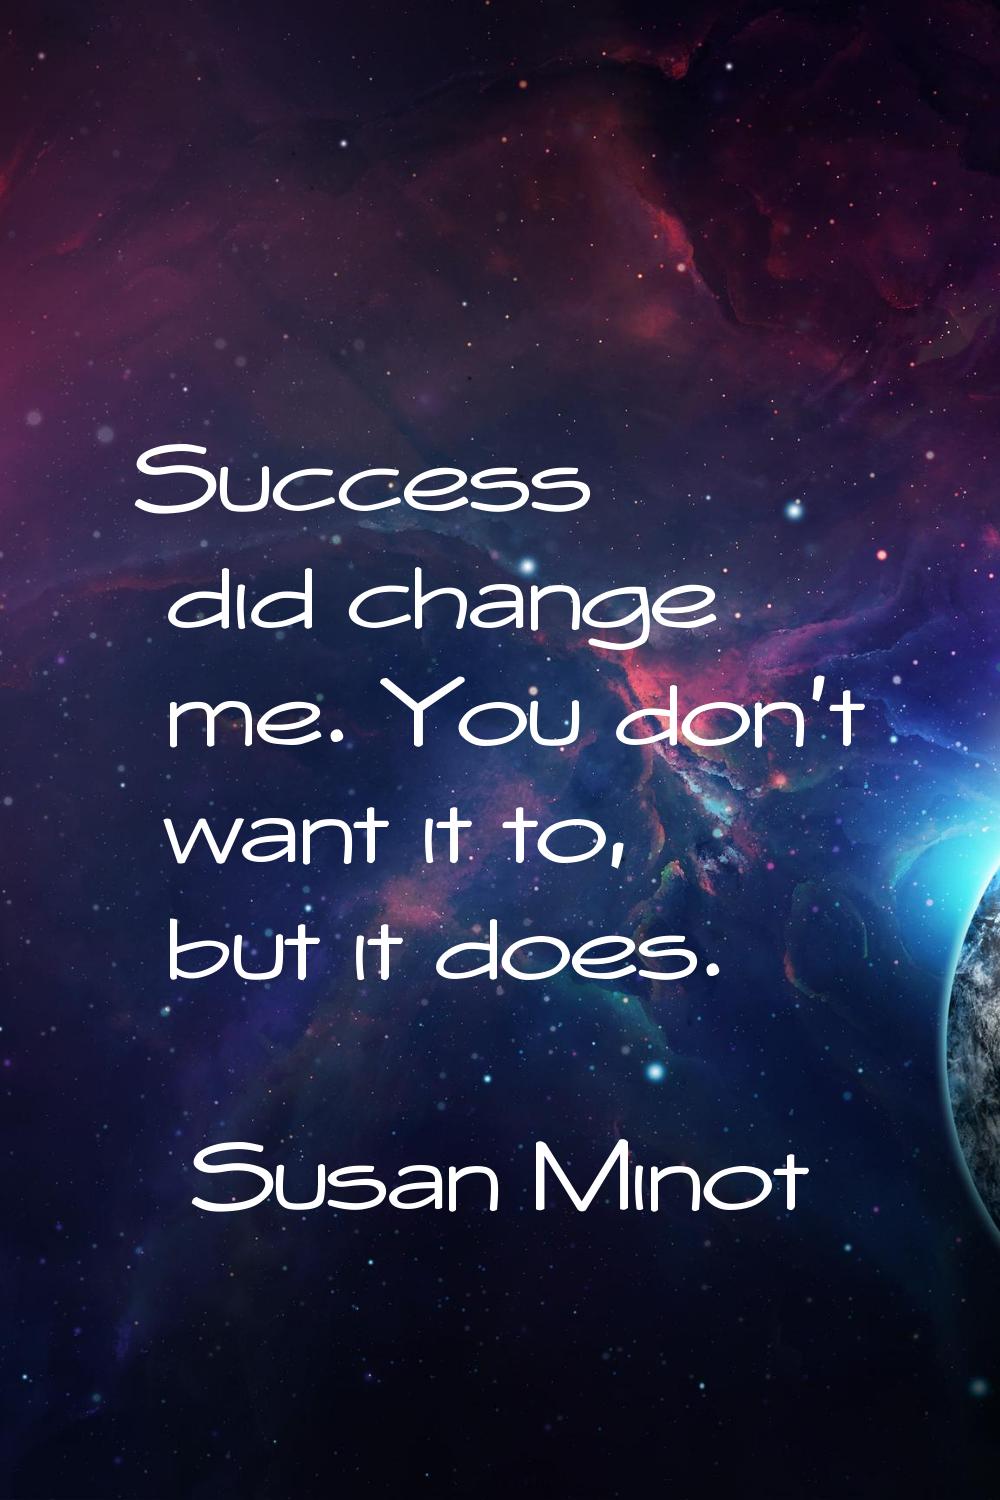 Success did change me. You don't want it to, but it does.